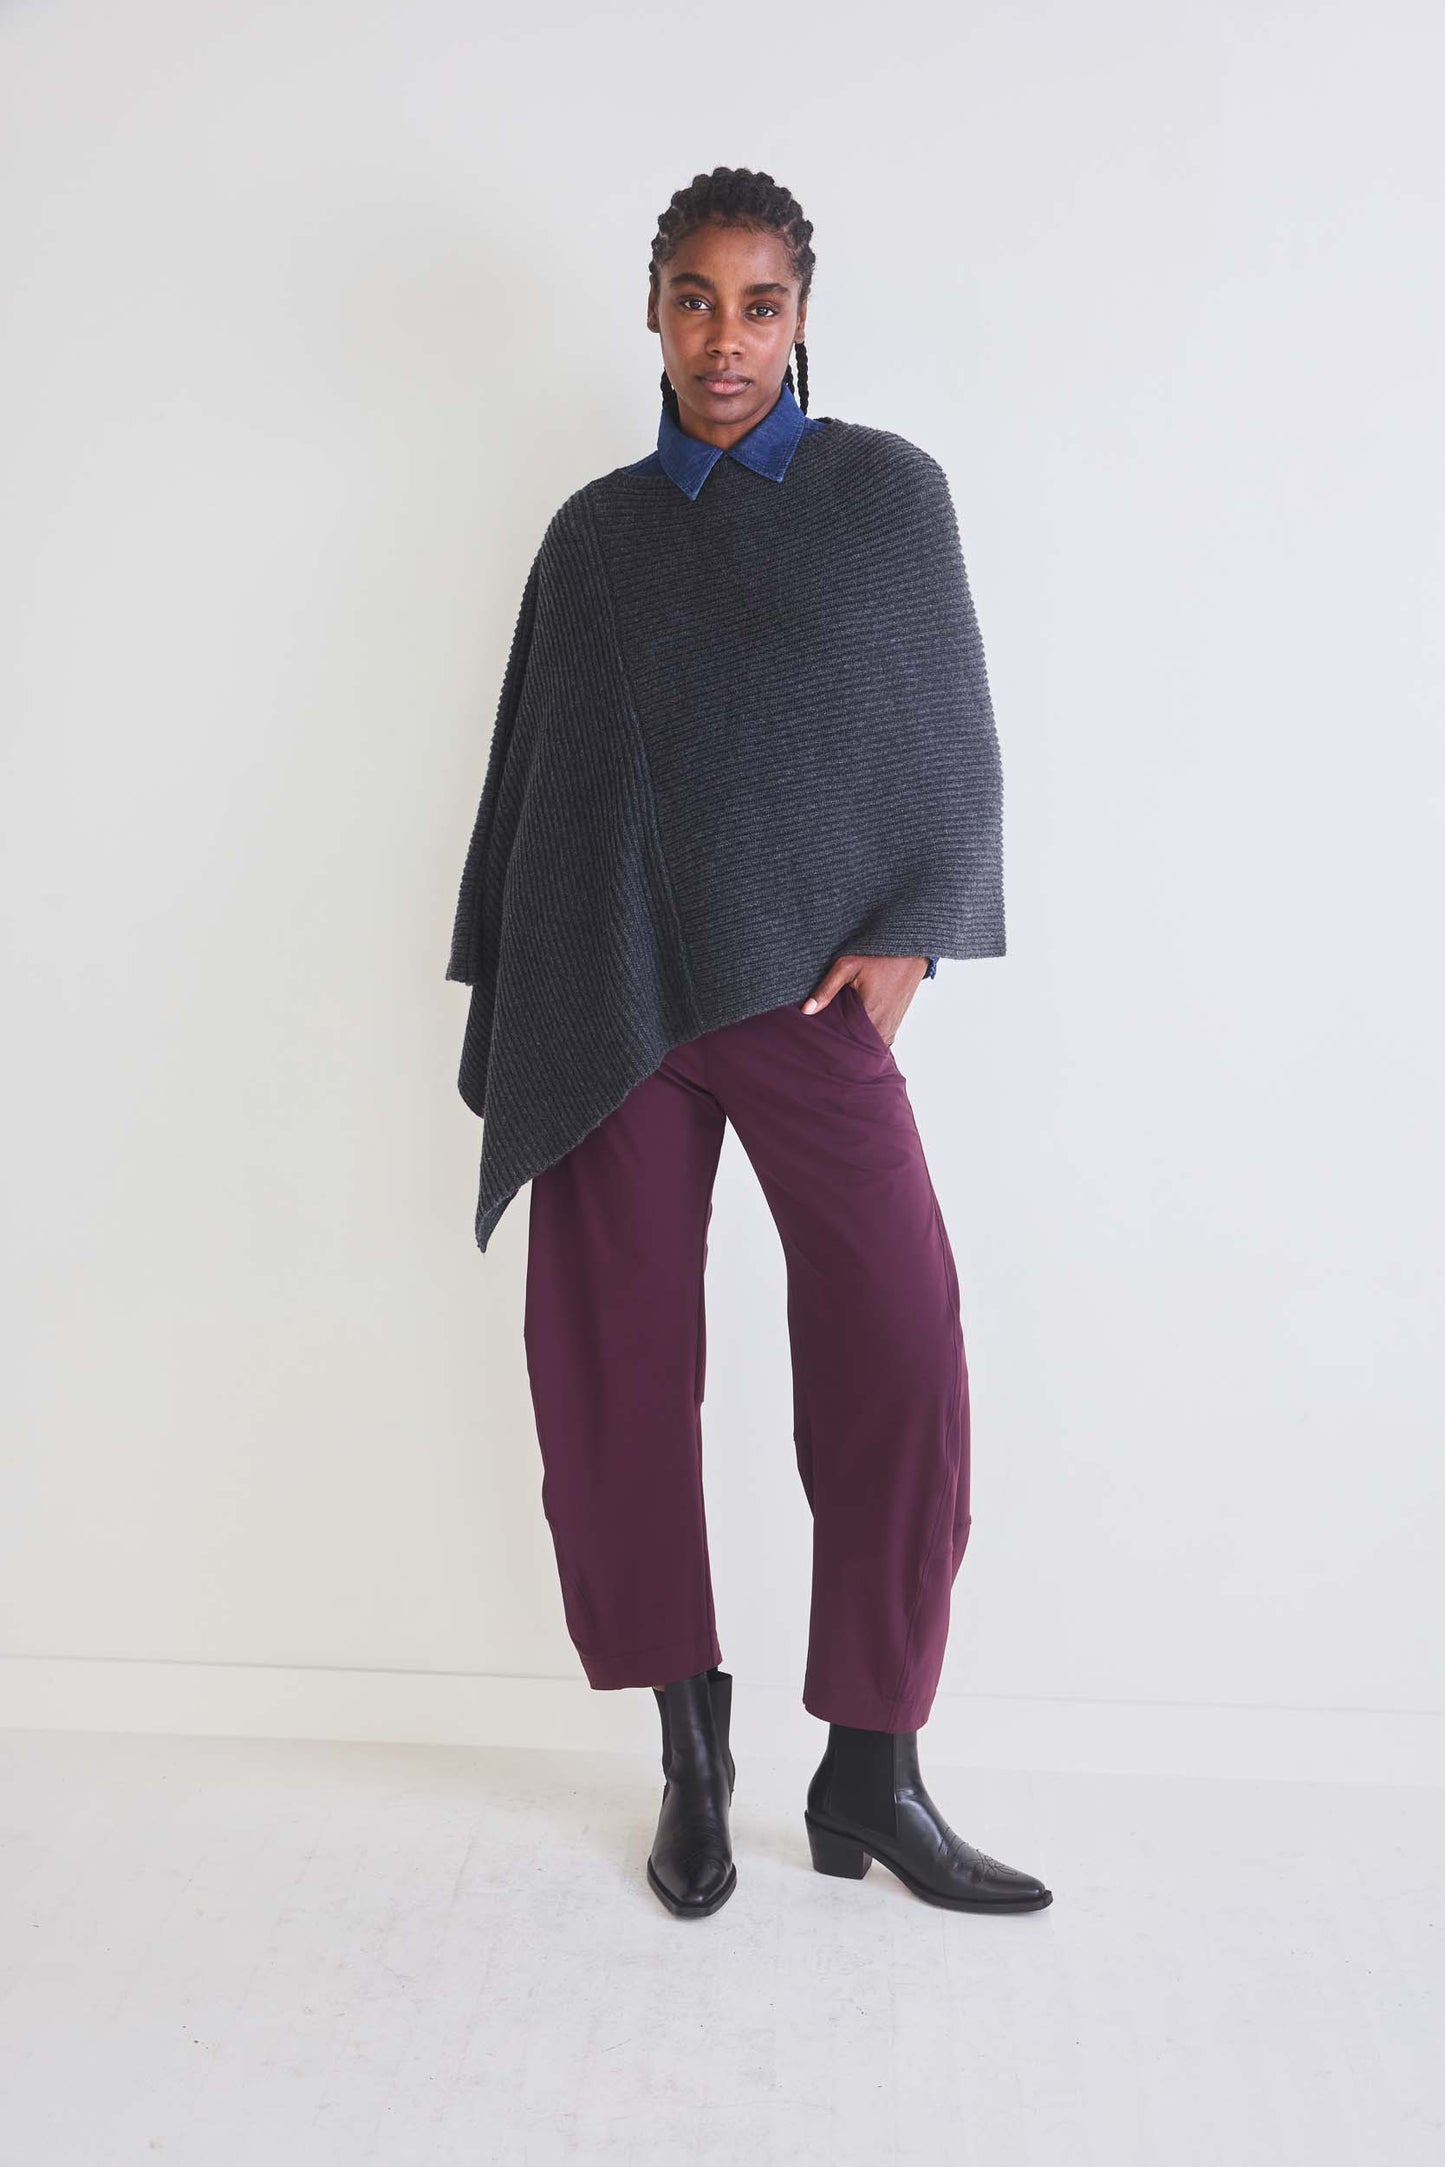 The Ribbed Knit Poncho